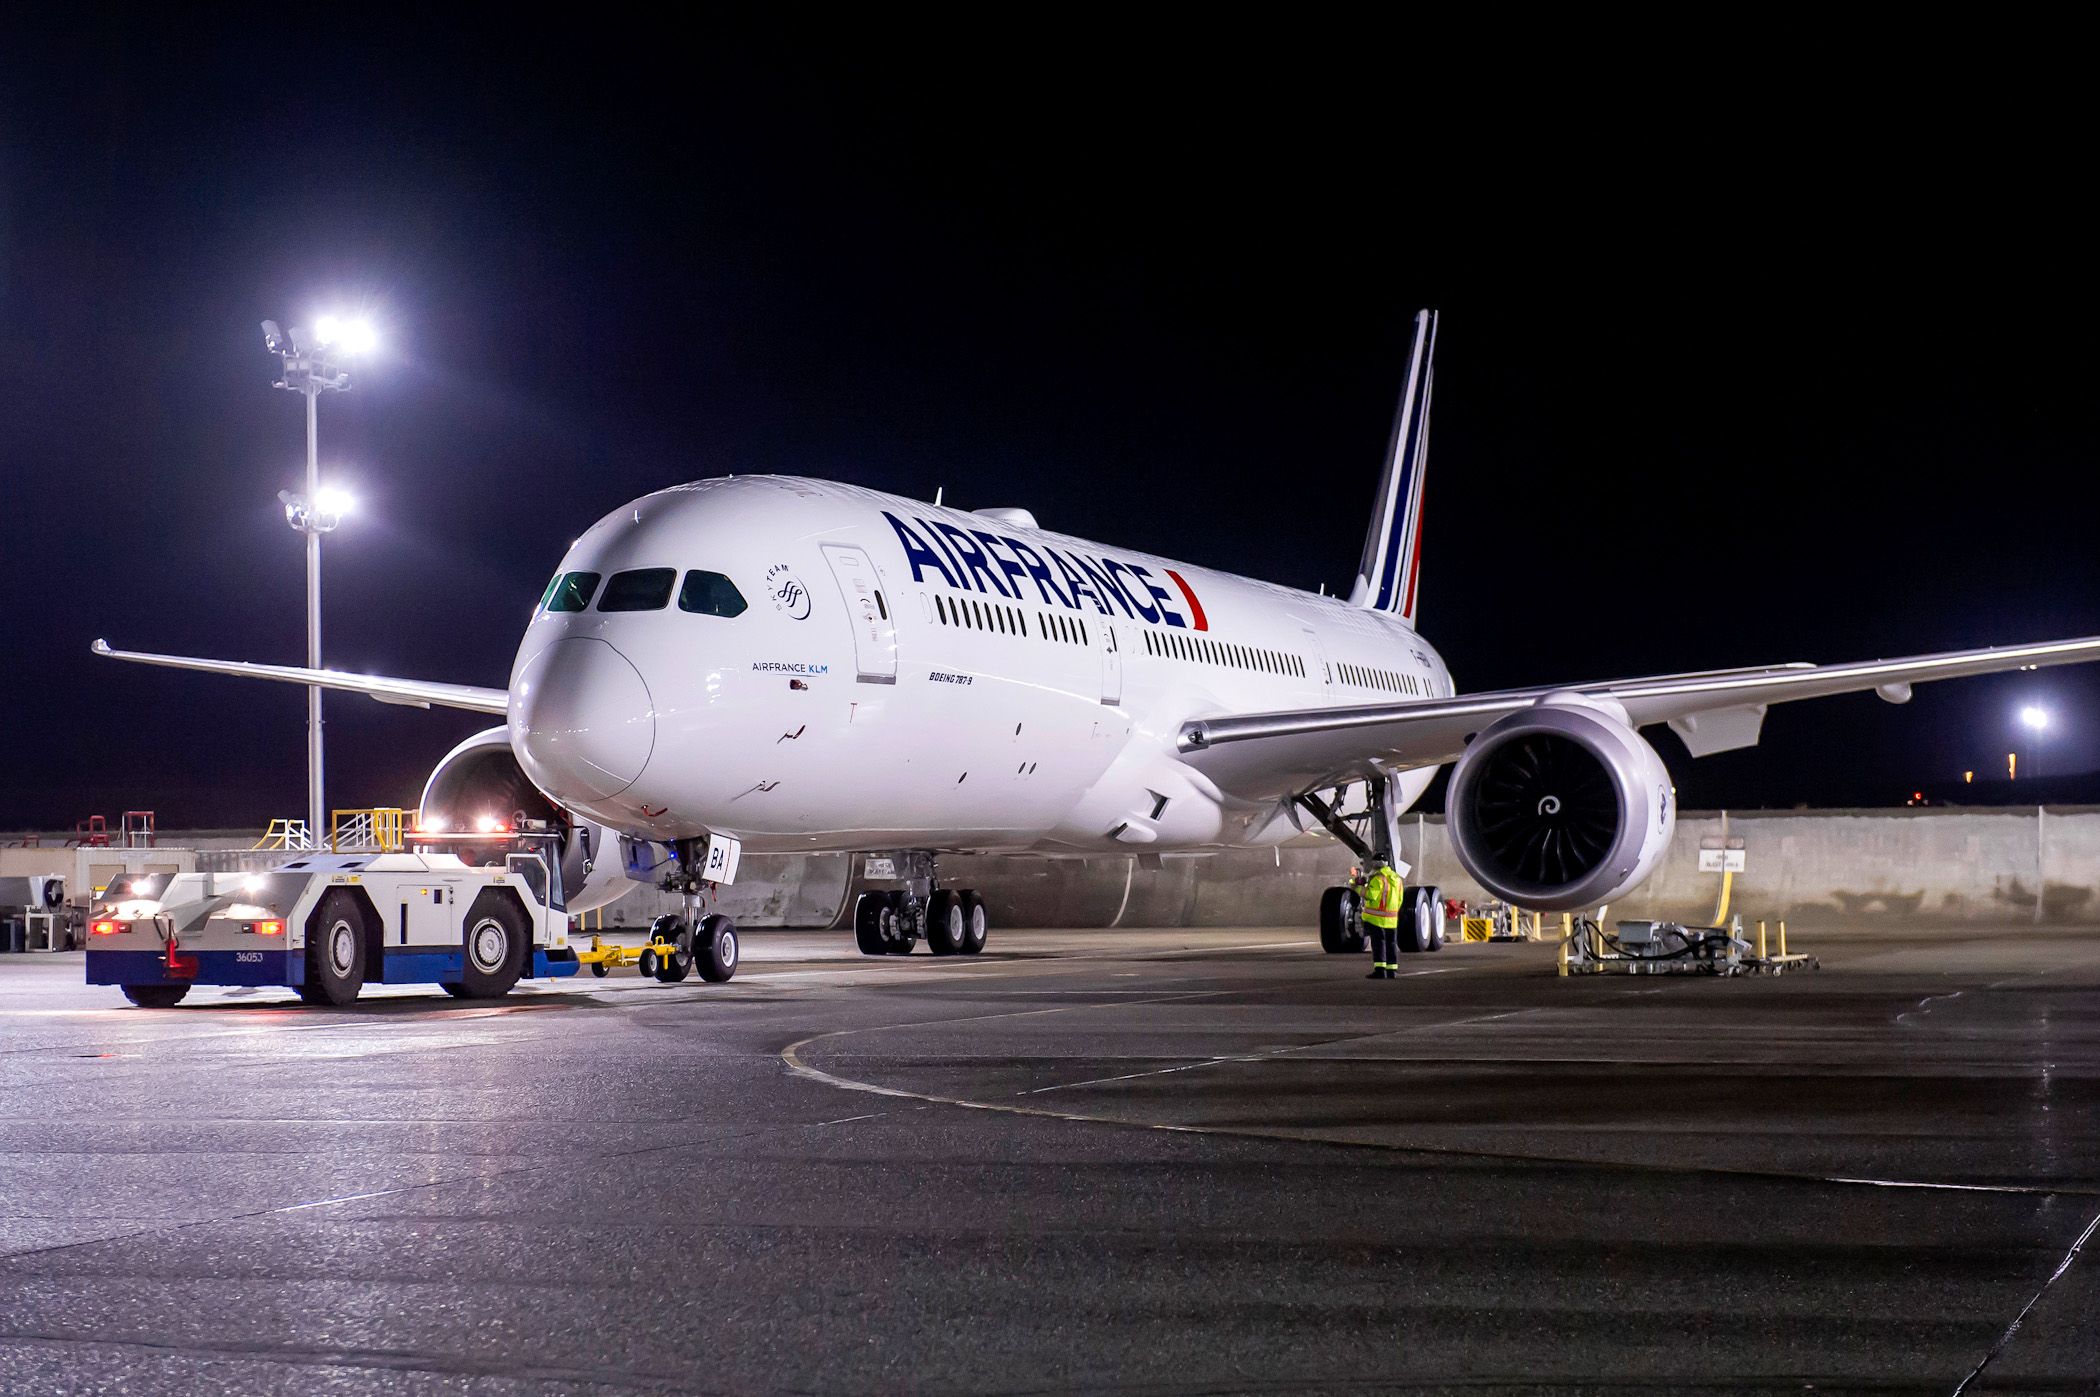 An AirFrance Boeing 787 being pushed back at an airport.